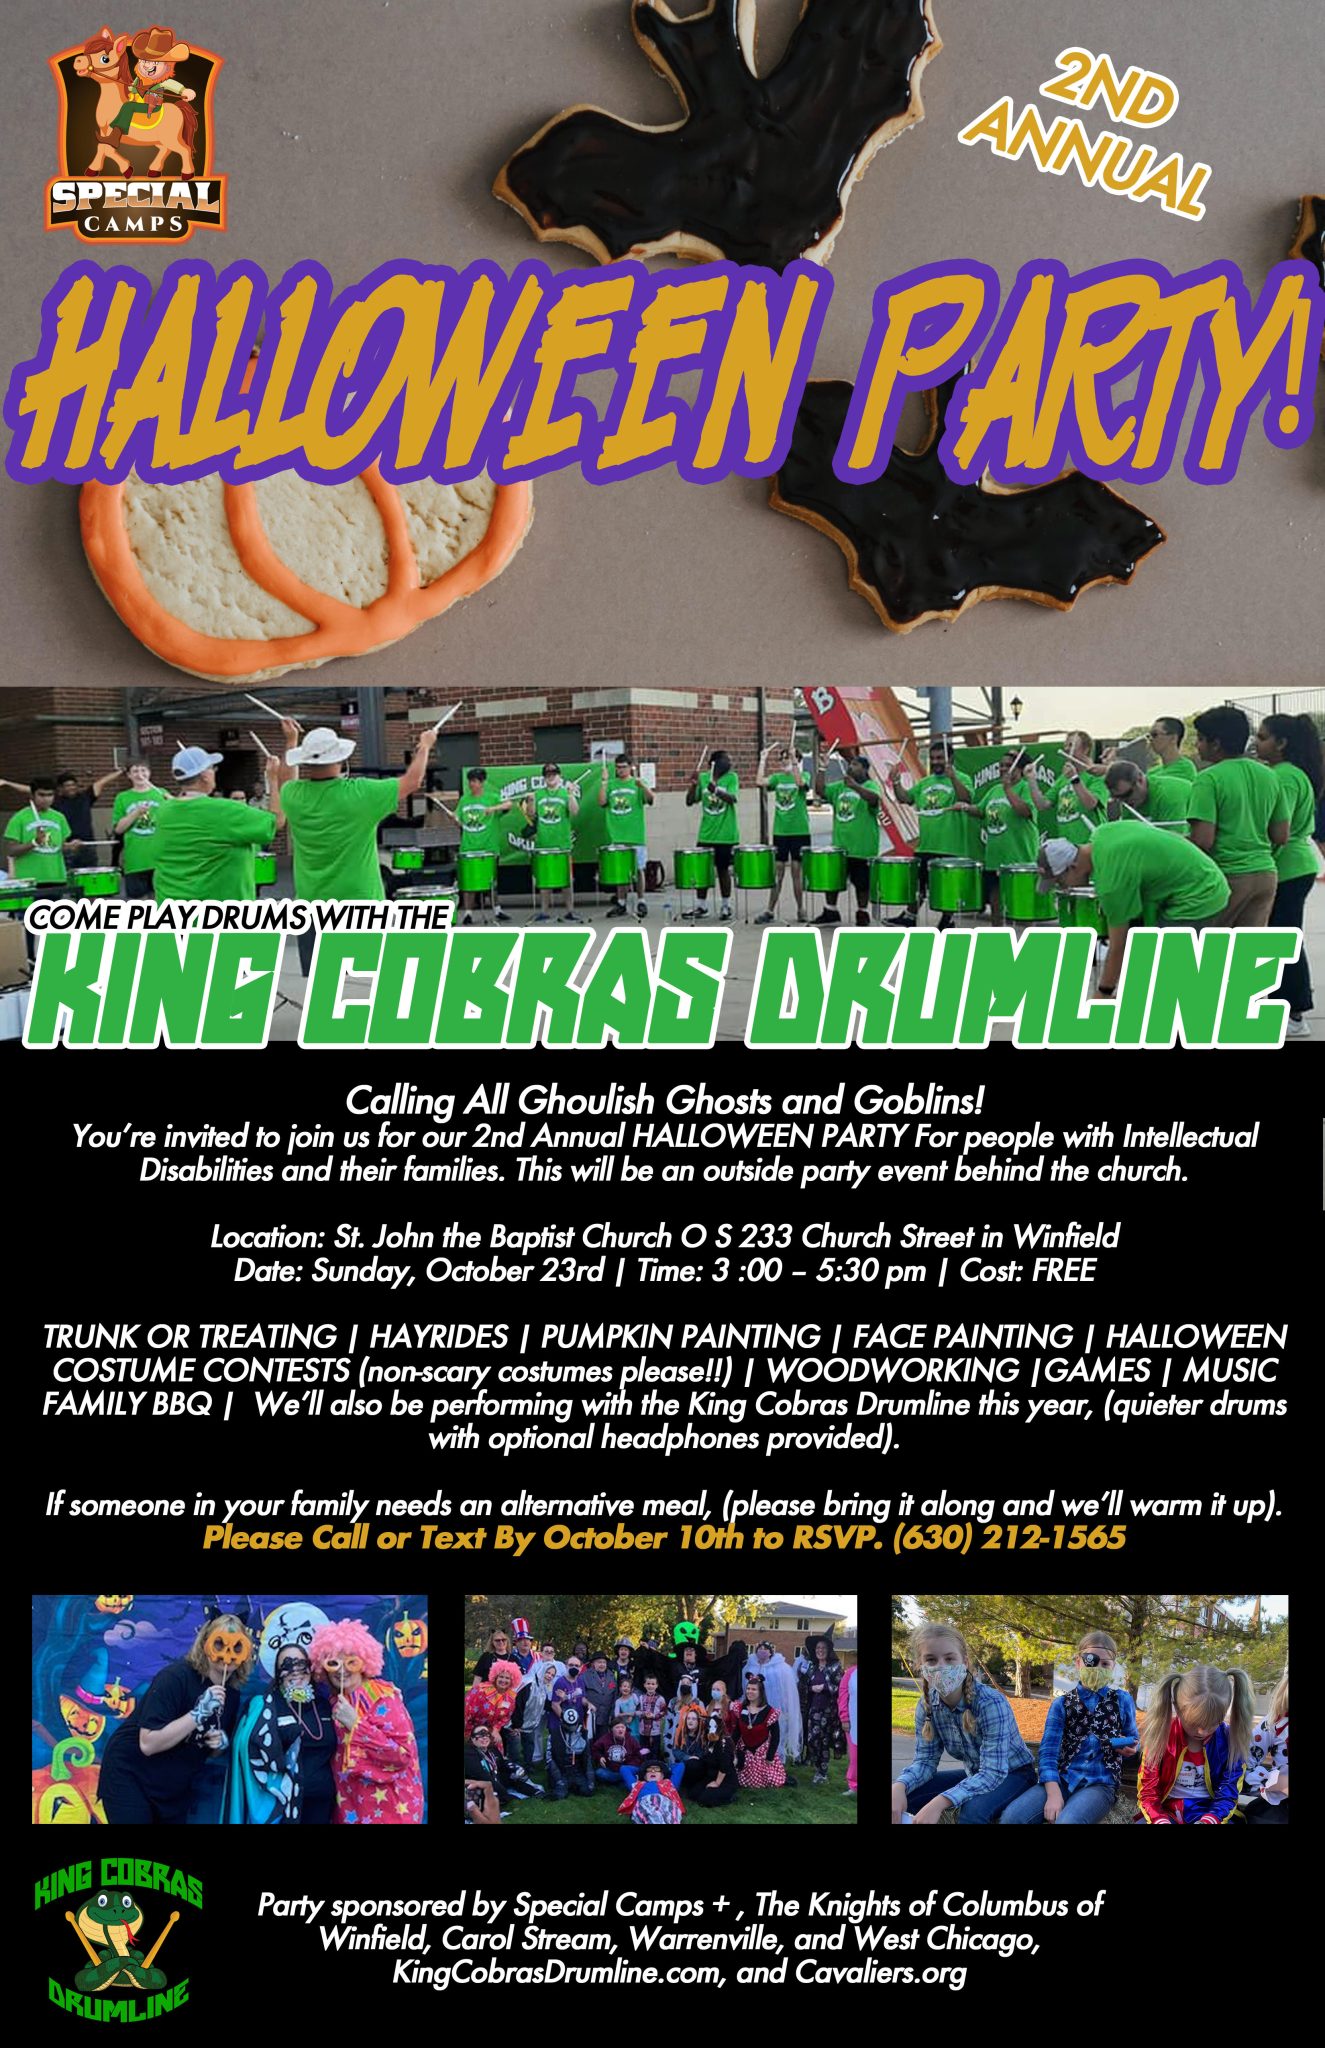 Special Camps Halloween Party!